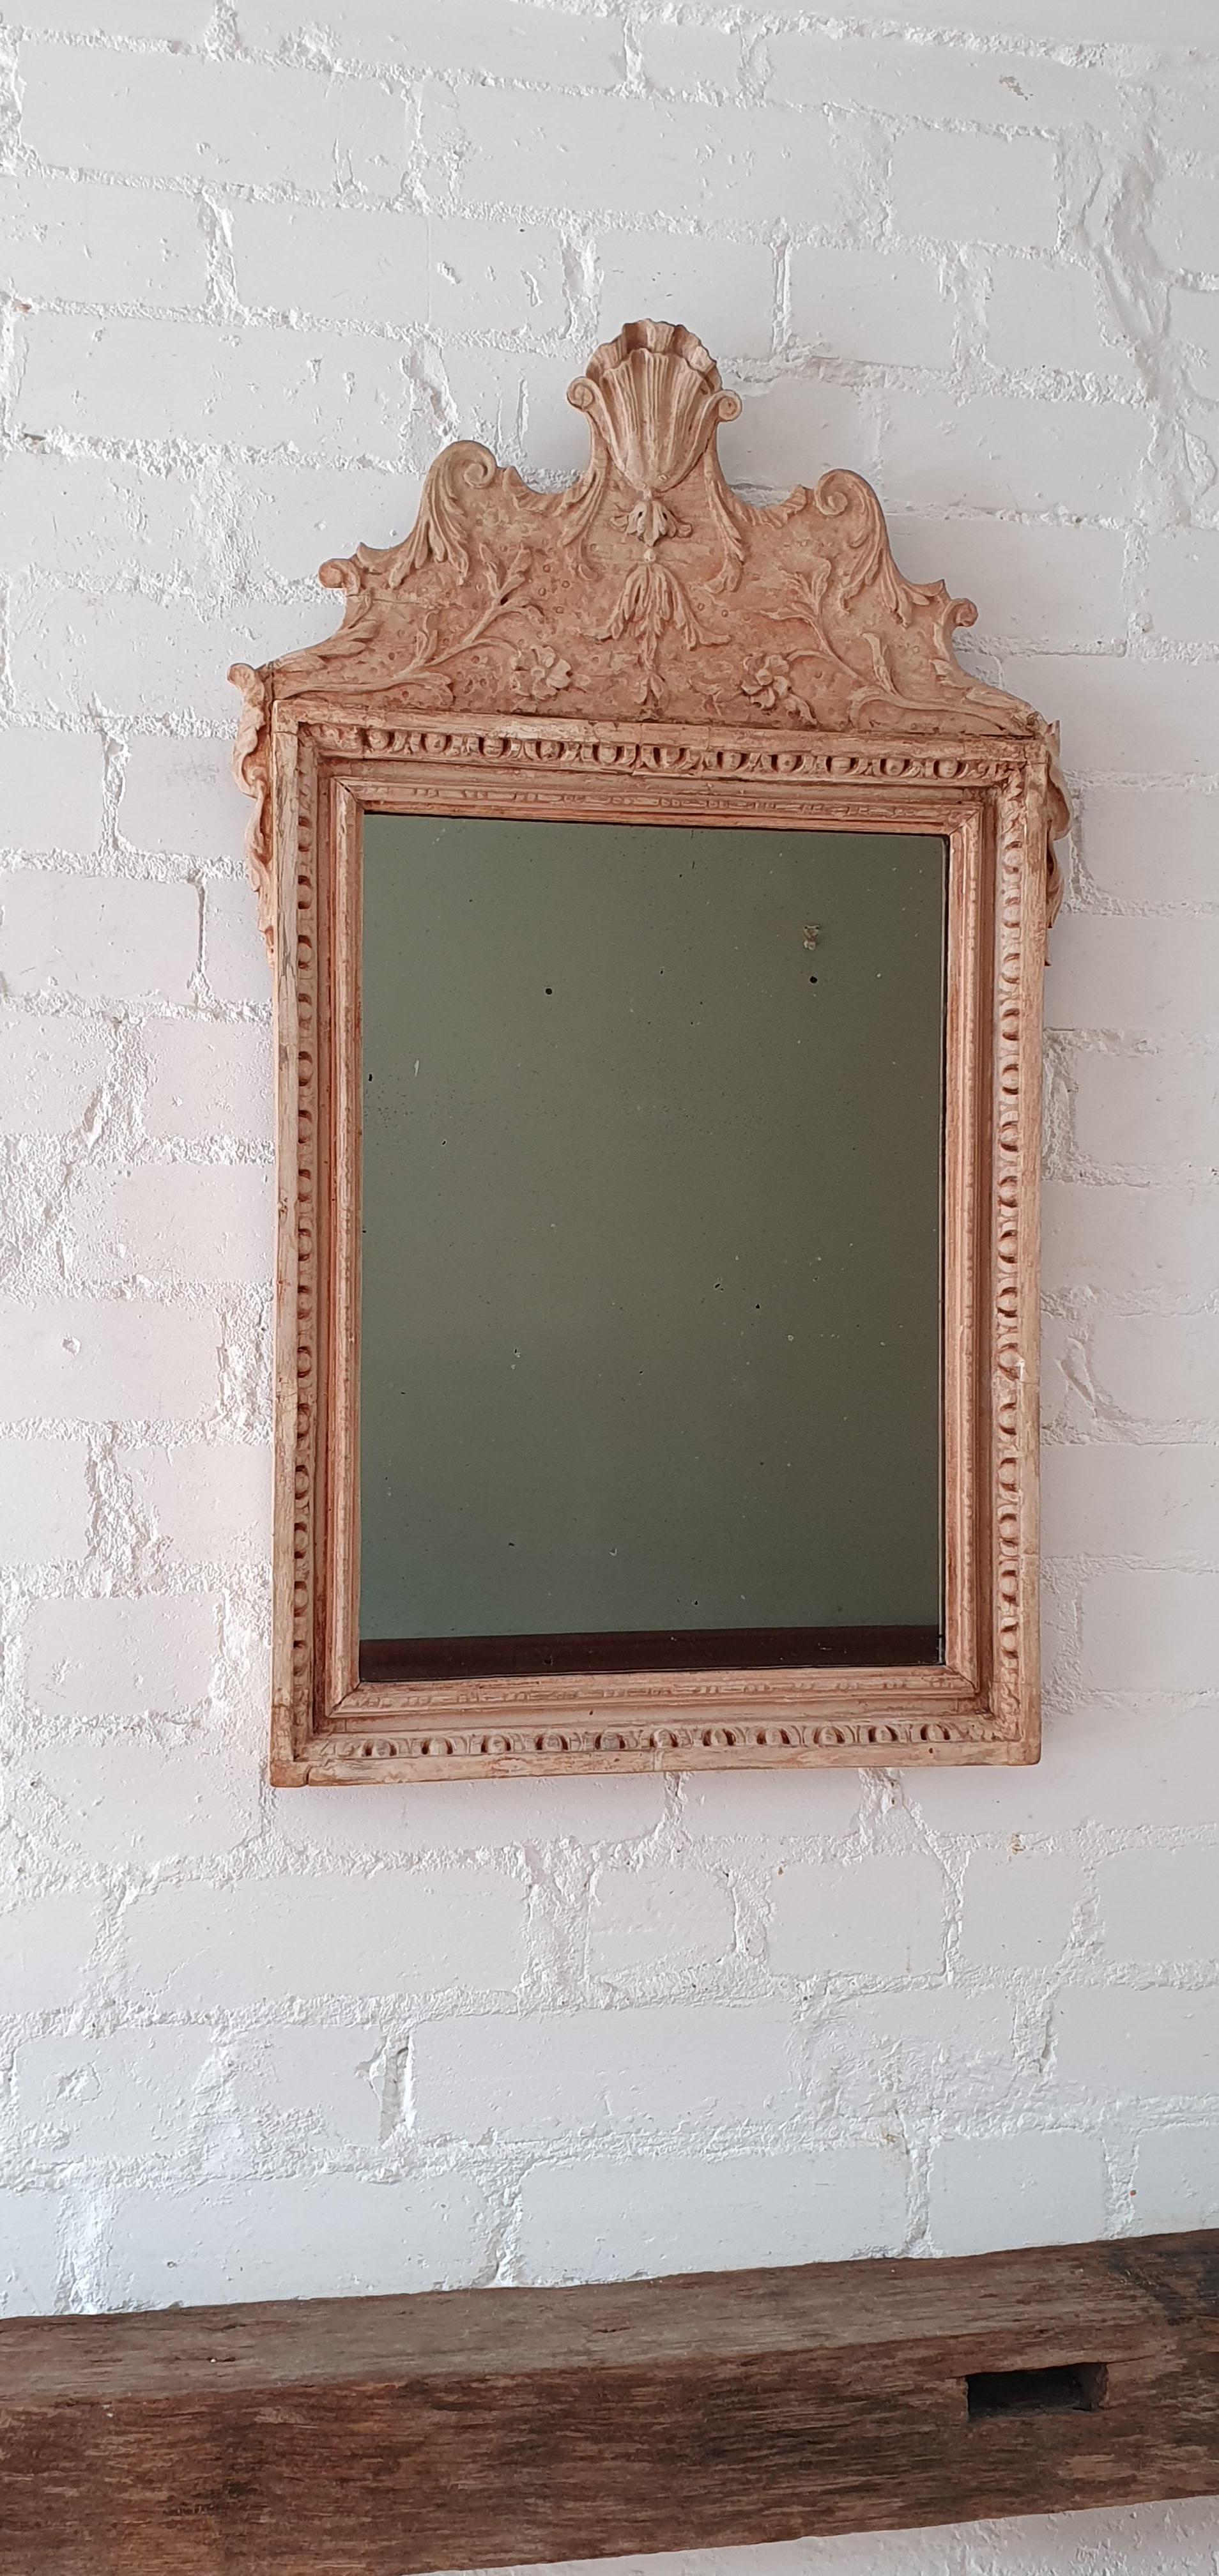 19th century provincial English wall mirror, Heavily distressed carved wood frame covered with remains of gesso,(gilding gone).
Original mercury glass with sign of age (scratches, black spots, etc). Unusual small mirror made by provincial maker